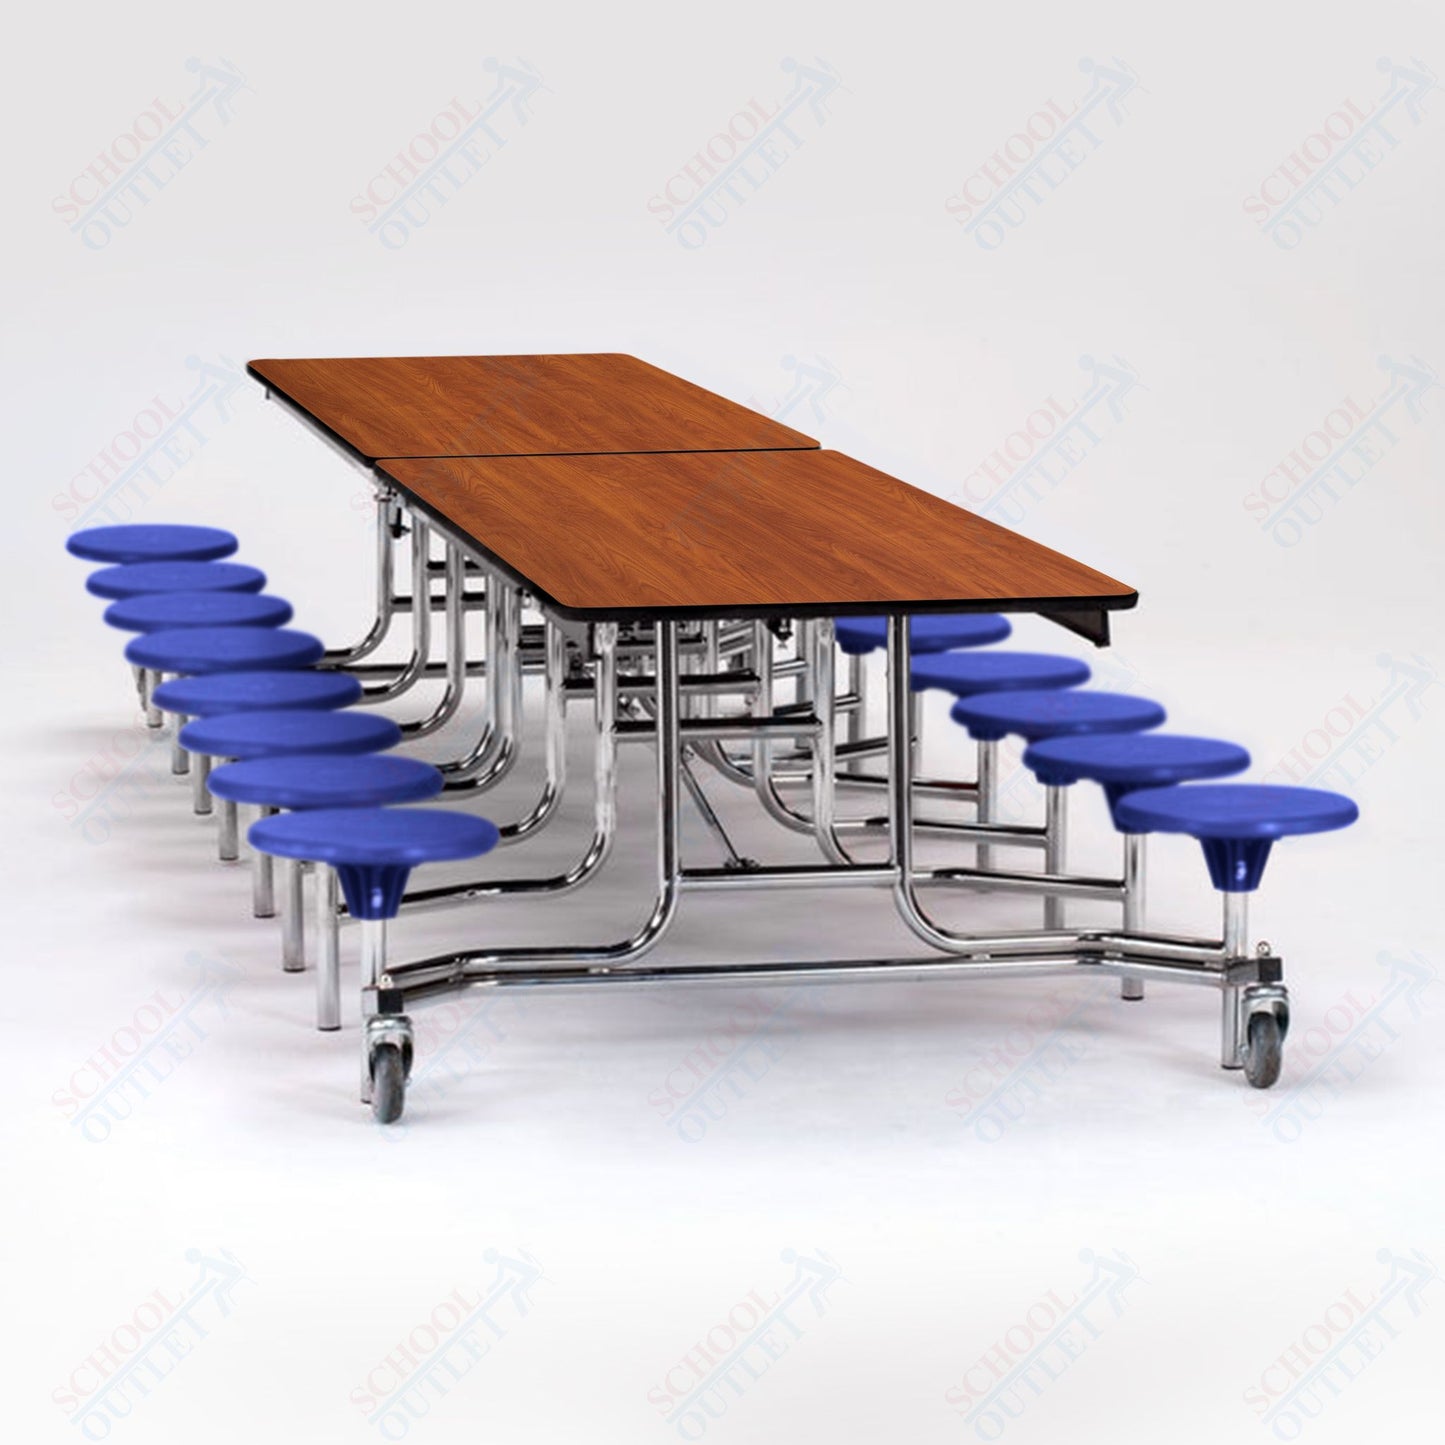 NPS Mobile Cafeteria Table - 30" W x 12' L - 16 Stools - MDF Core - Protect Edge - Black Powdercoated Frame